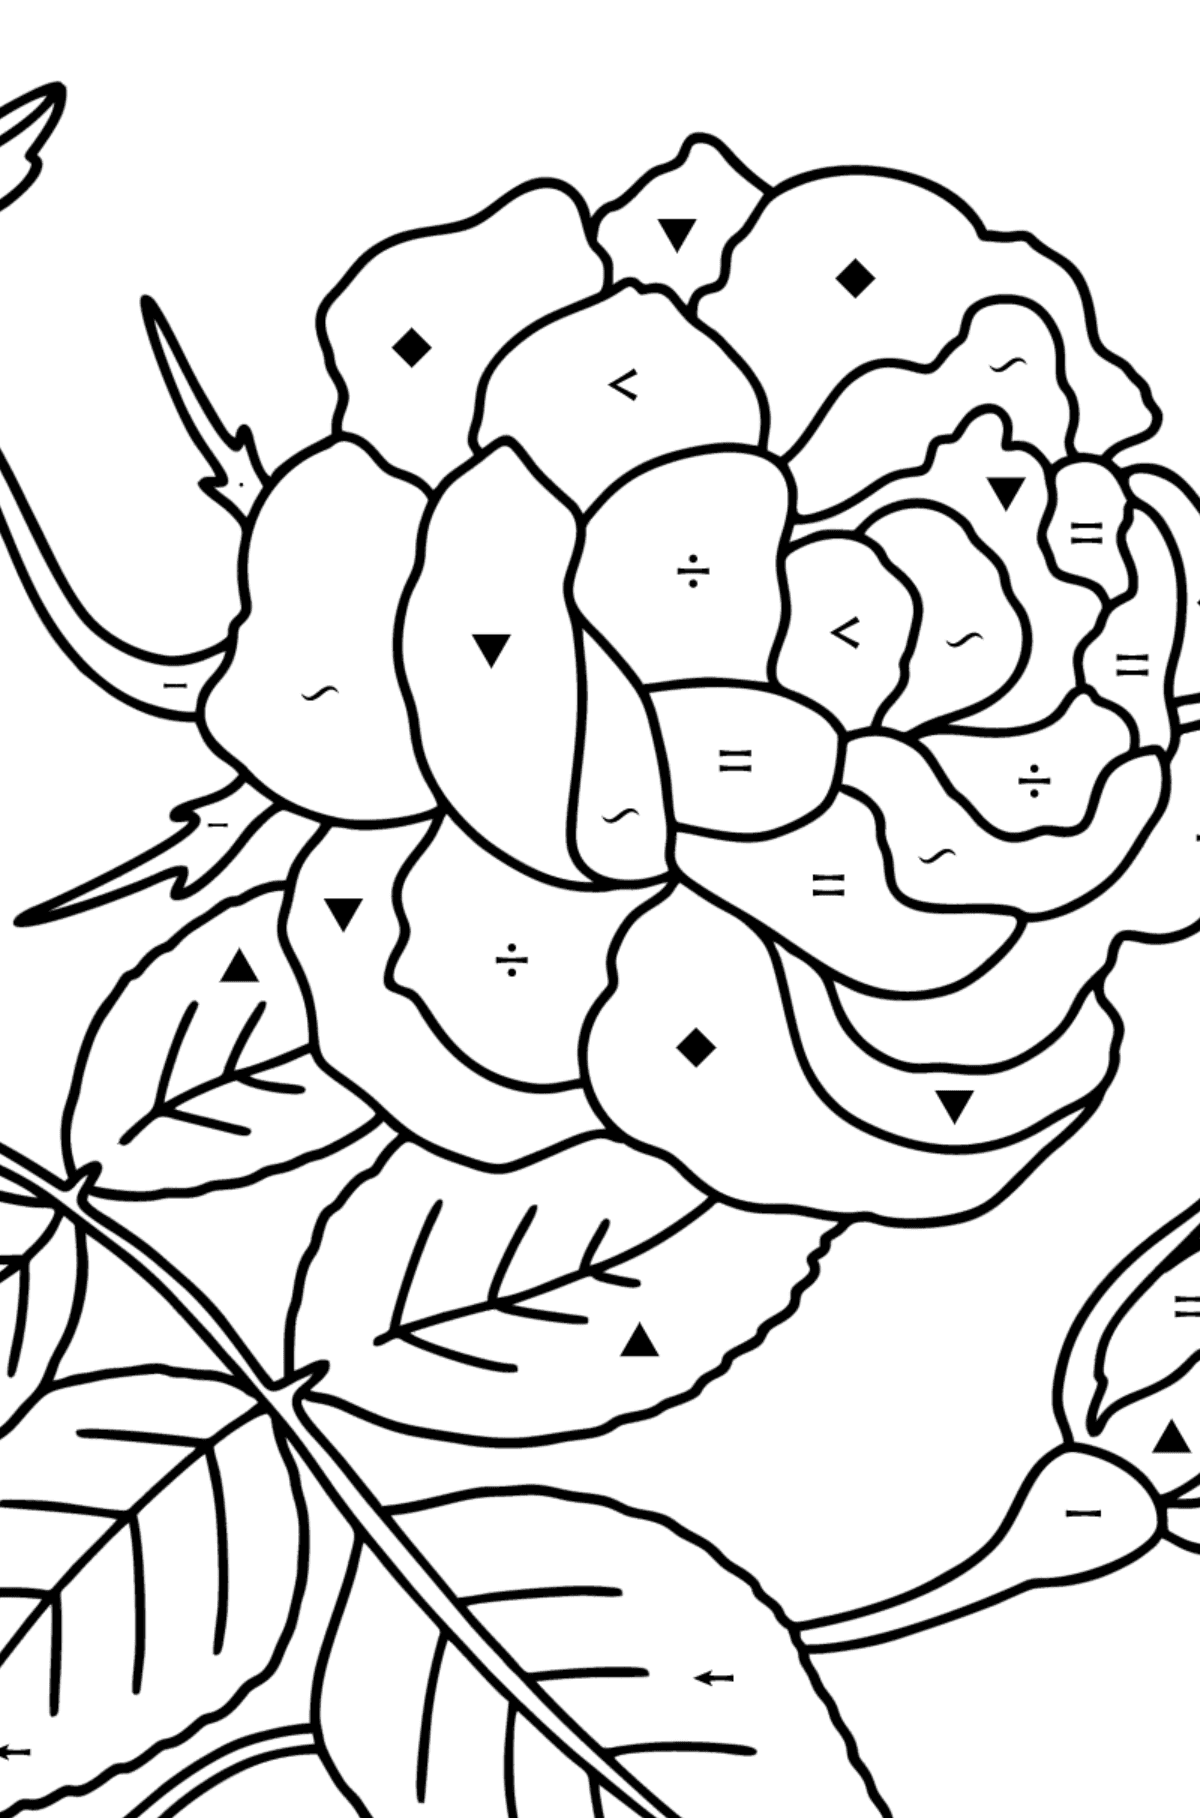 Climbing rose red coloring page - Coloring by Symbols for Kids